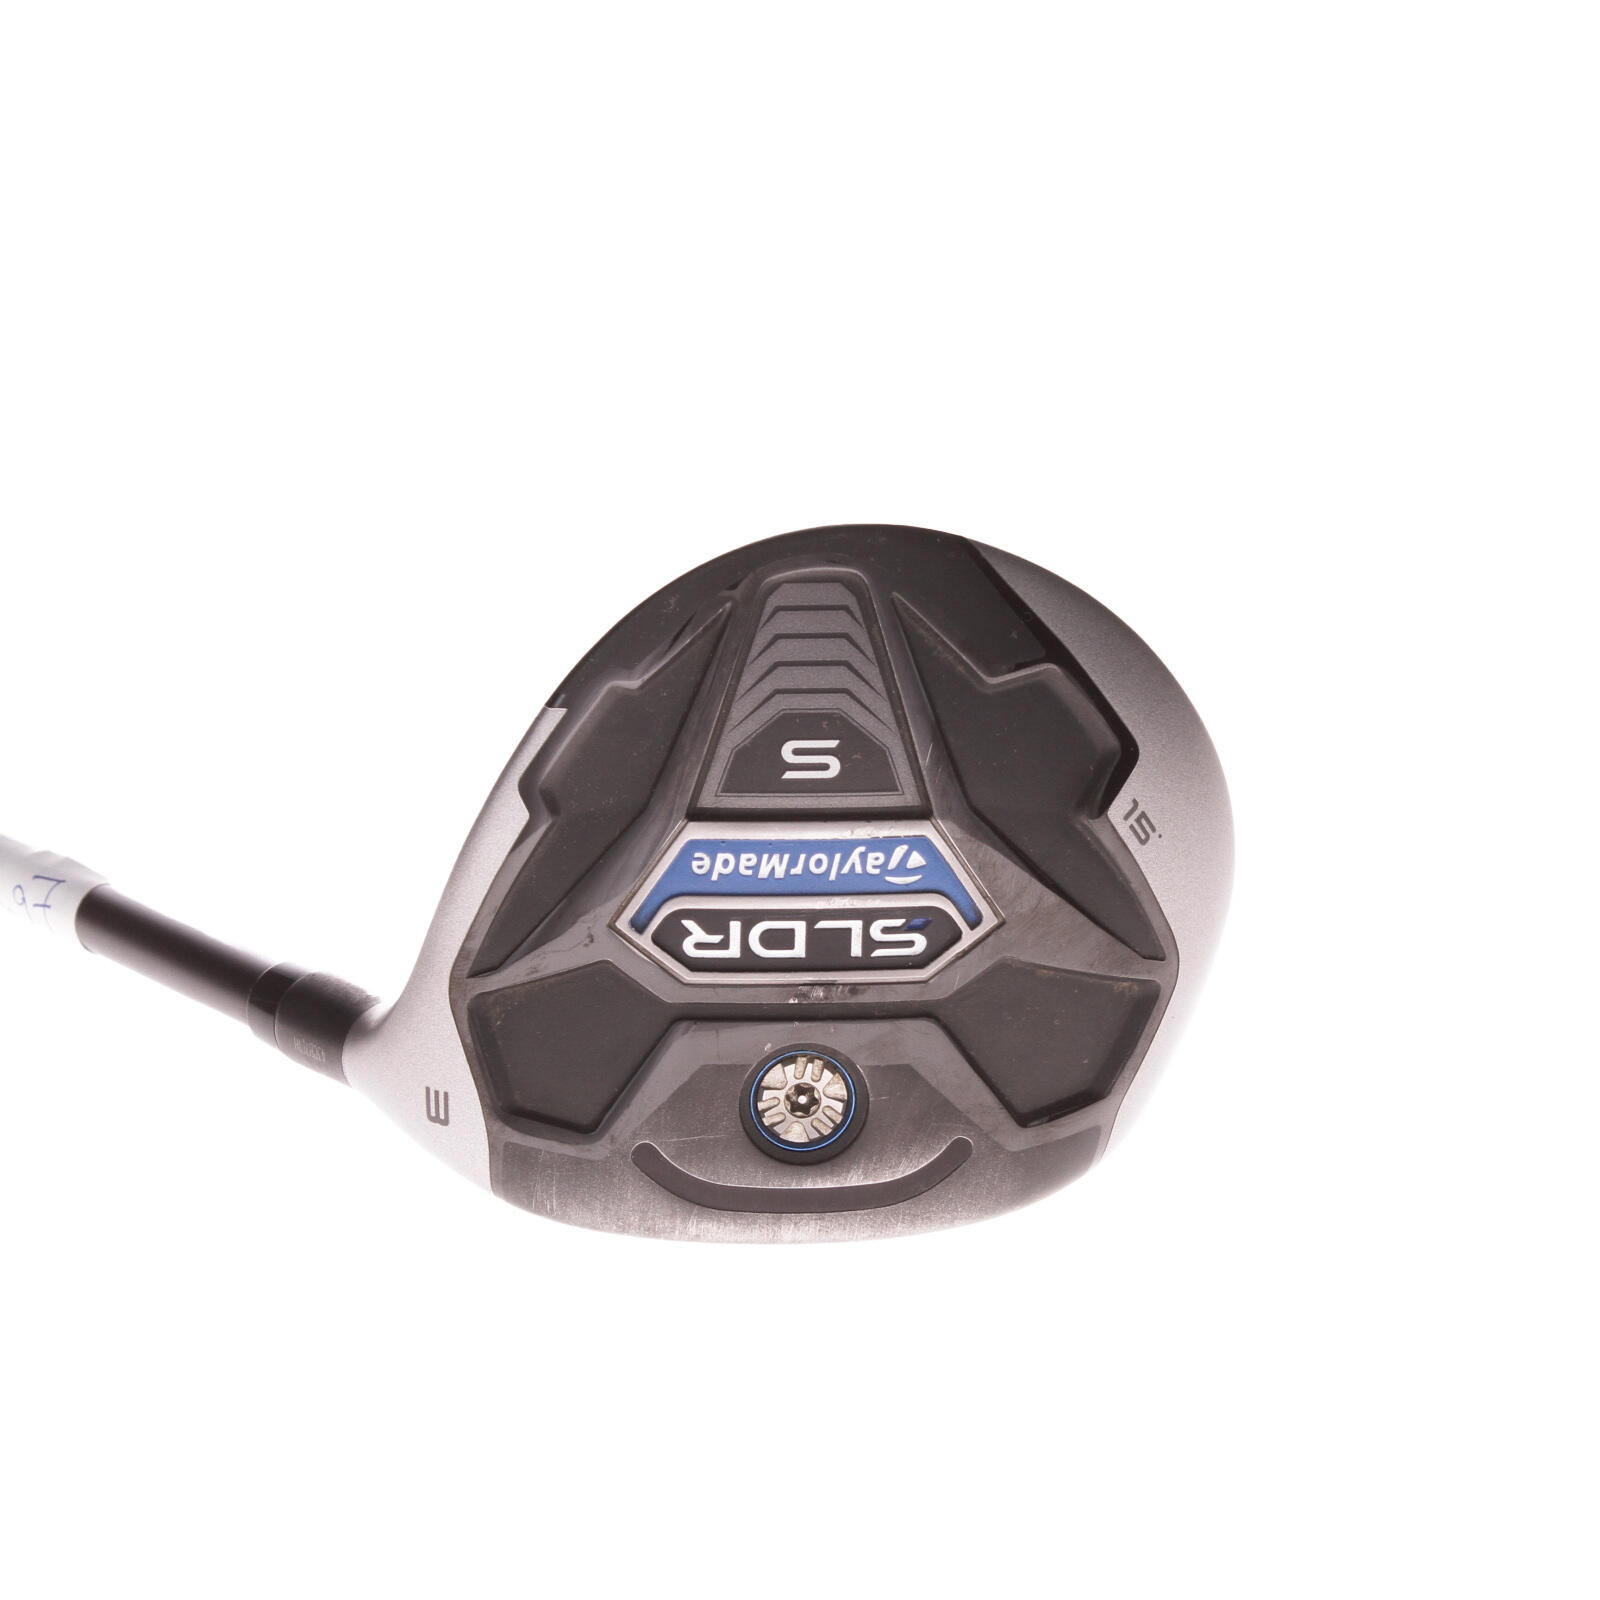 TAYLORMADE USED - Fairway 3 Wood TaylorMade SLDR S 15* Graphite Shaft Right Hand - GRADE B